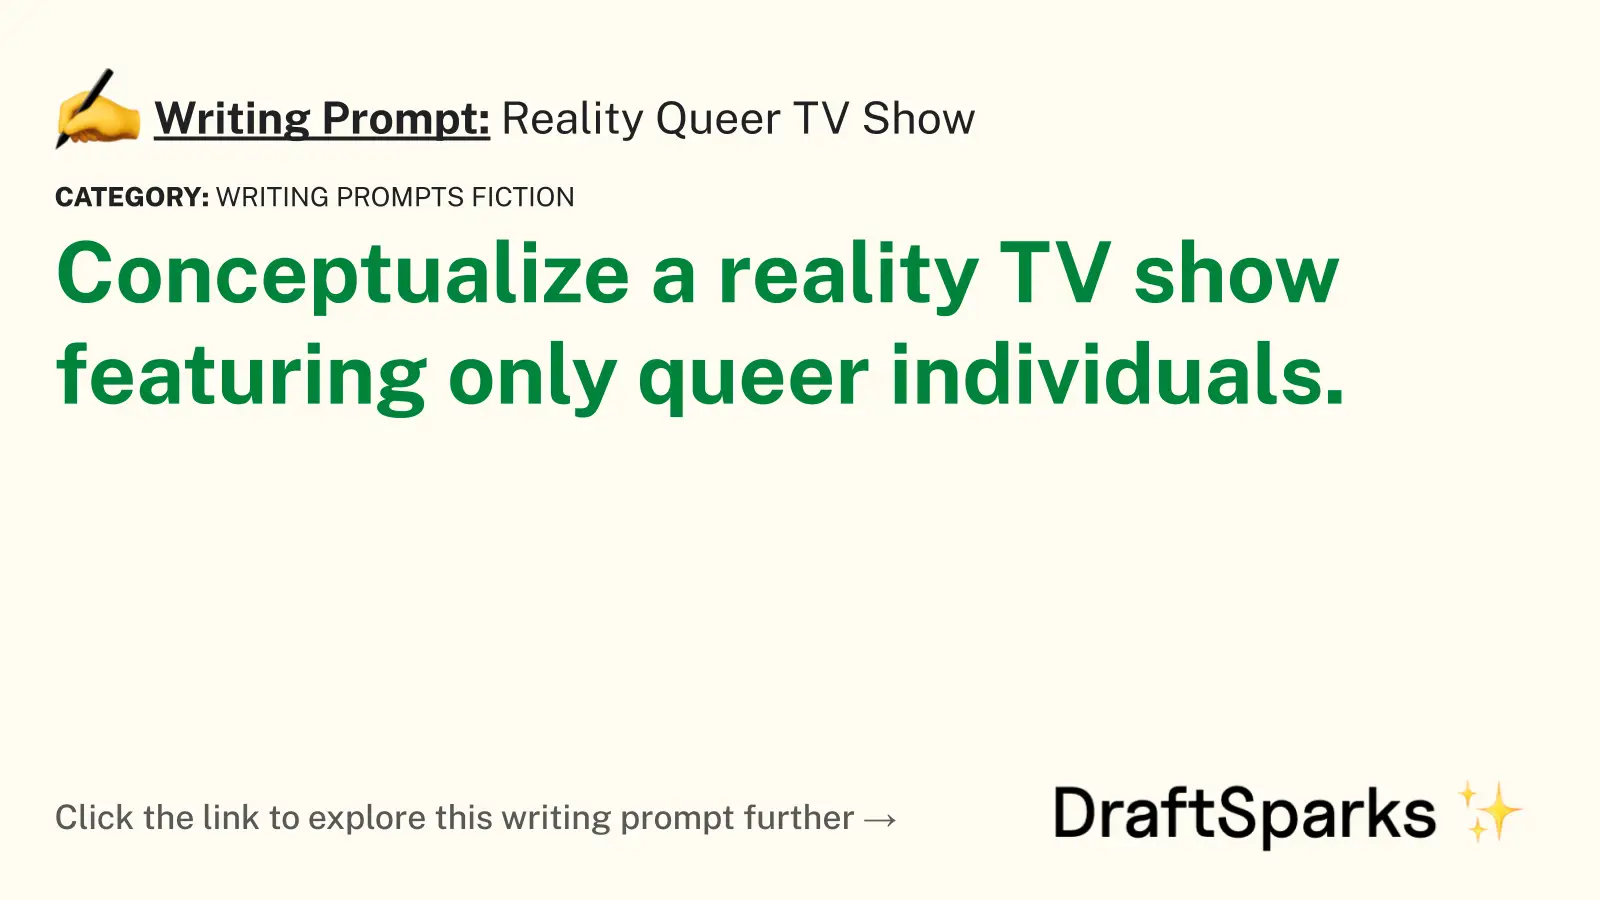 Reality Queer TV Show